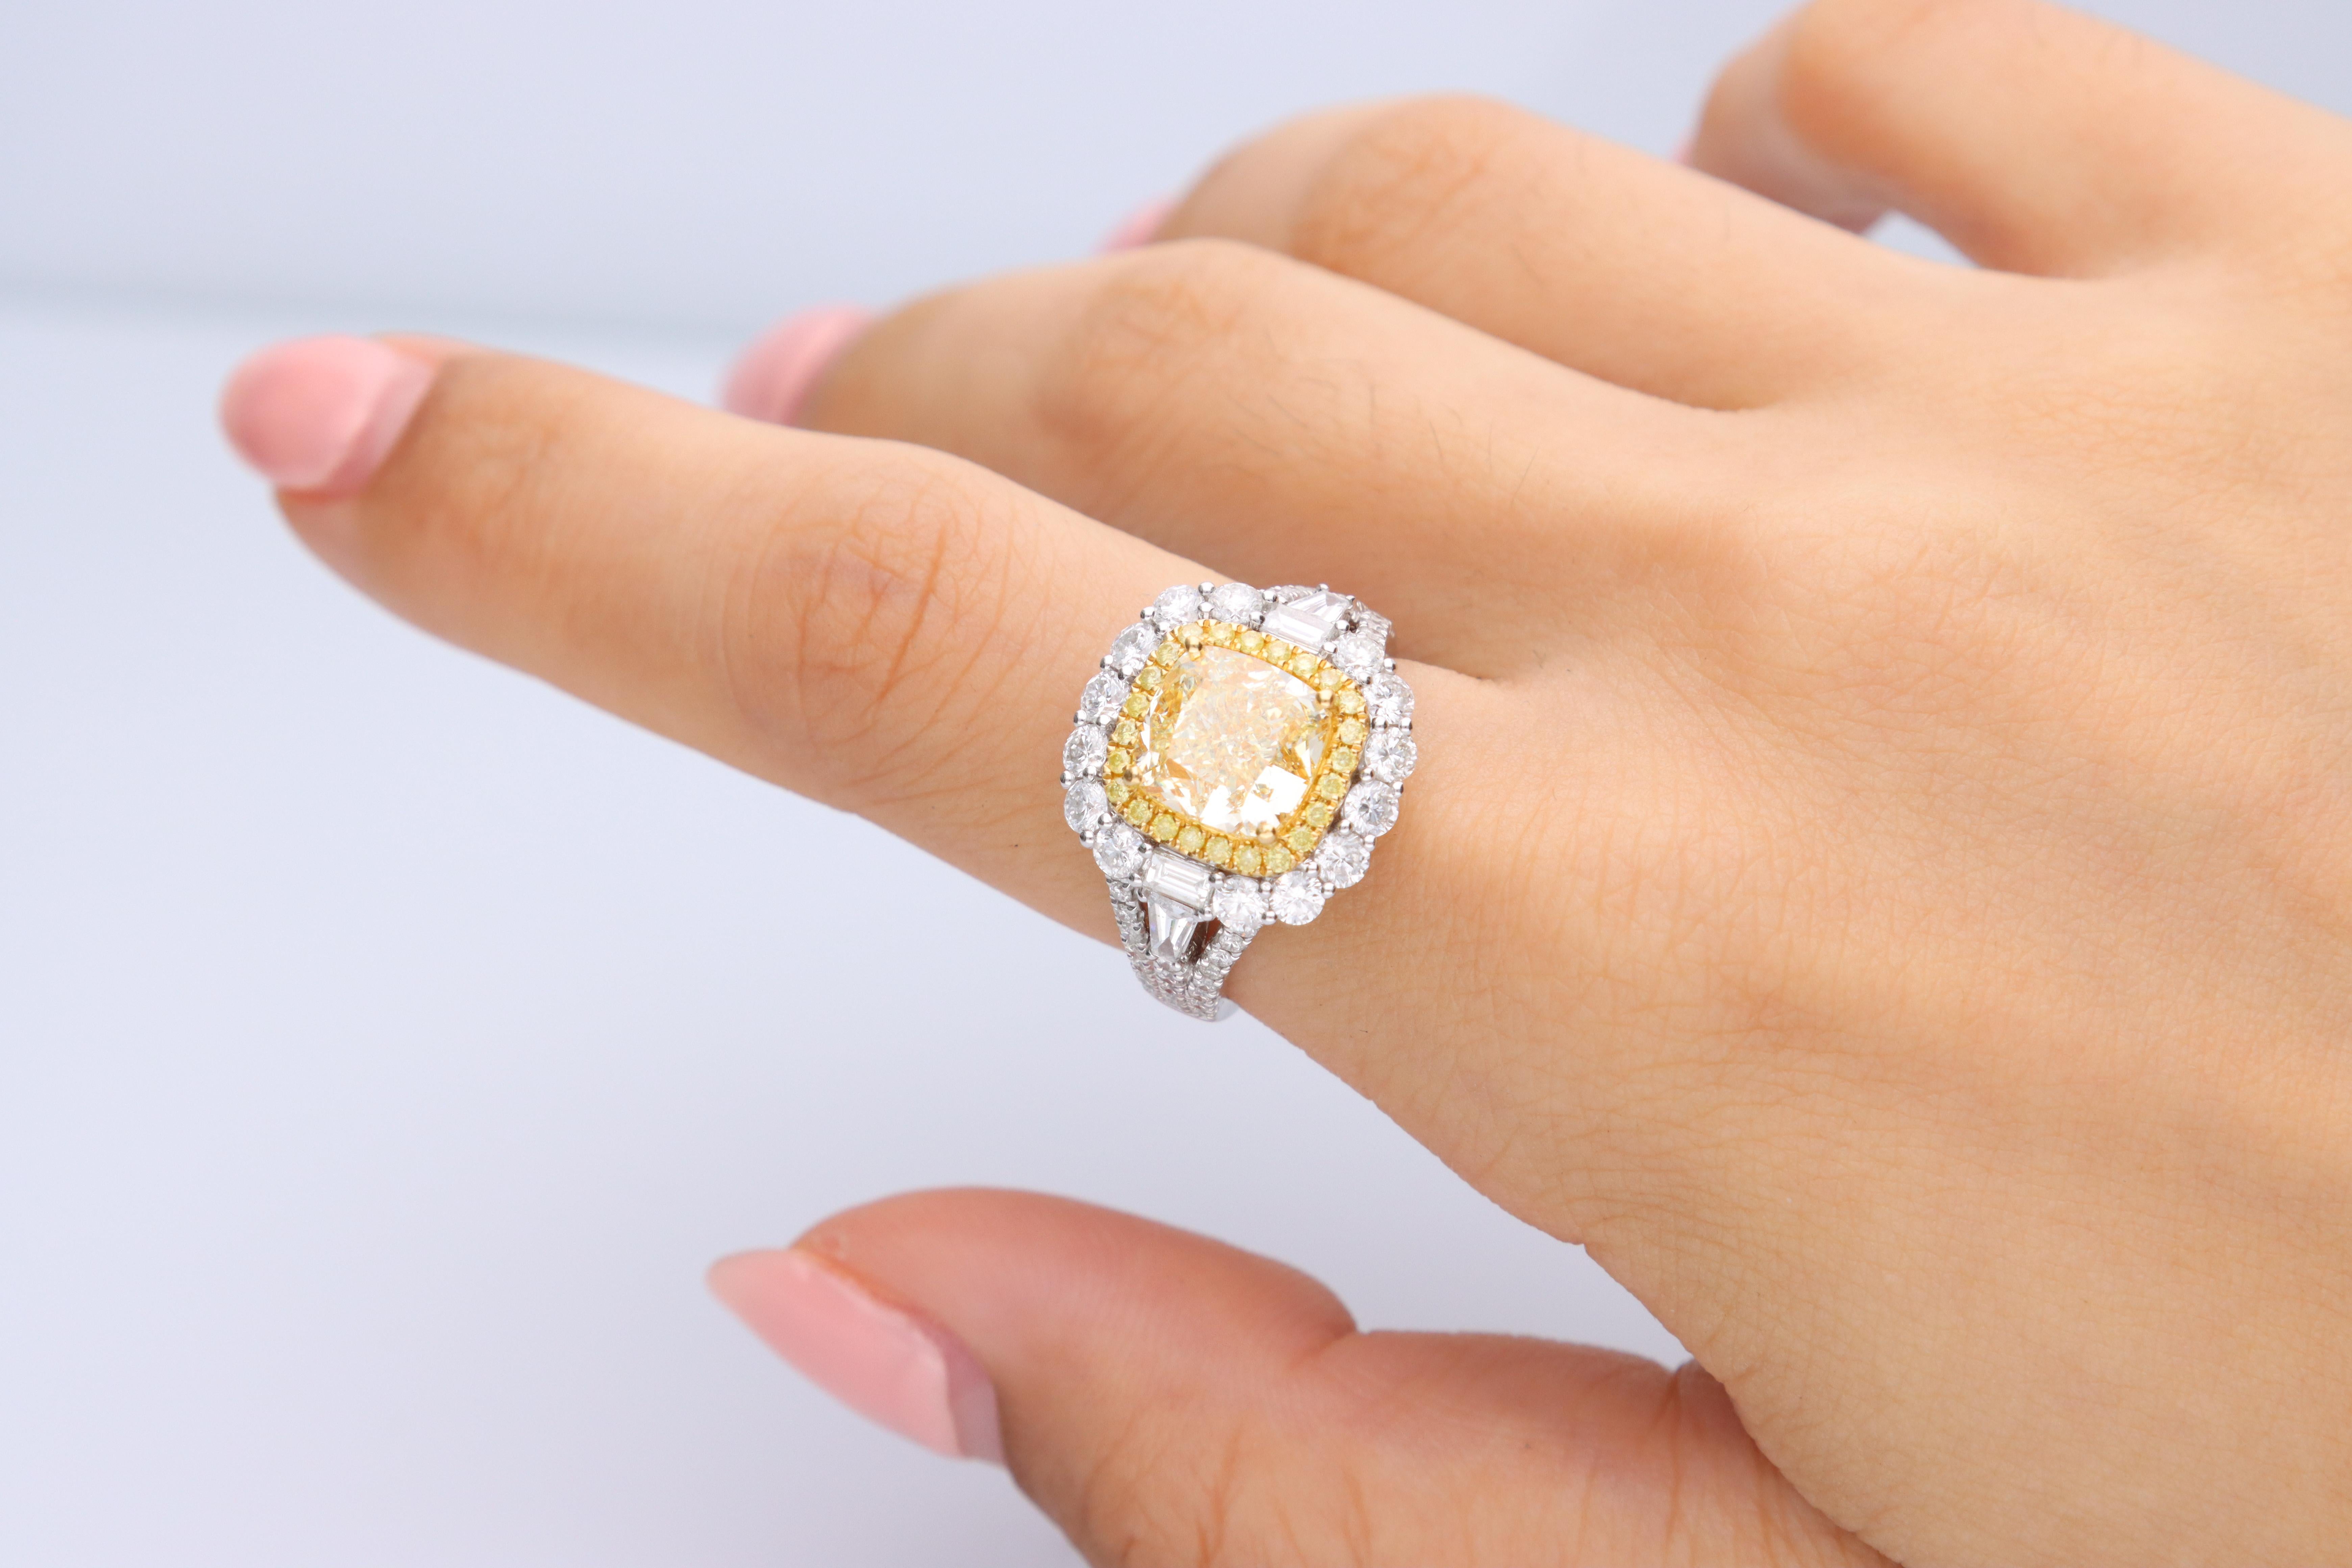 Stunning, timeless and classy eternity Unique Ring. Decorate yourself in luxury with this Gin & Grace Ring. The 18K Two Tone Gold jewelry boasts with Cushion-cut 1 pcs 3.51 carat, Round-cut 24 pcs 0.19 carat Yellow Diamond and Natural Round-cut